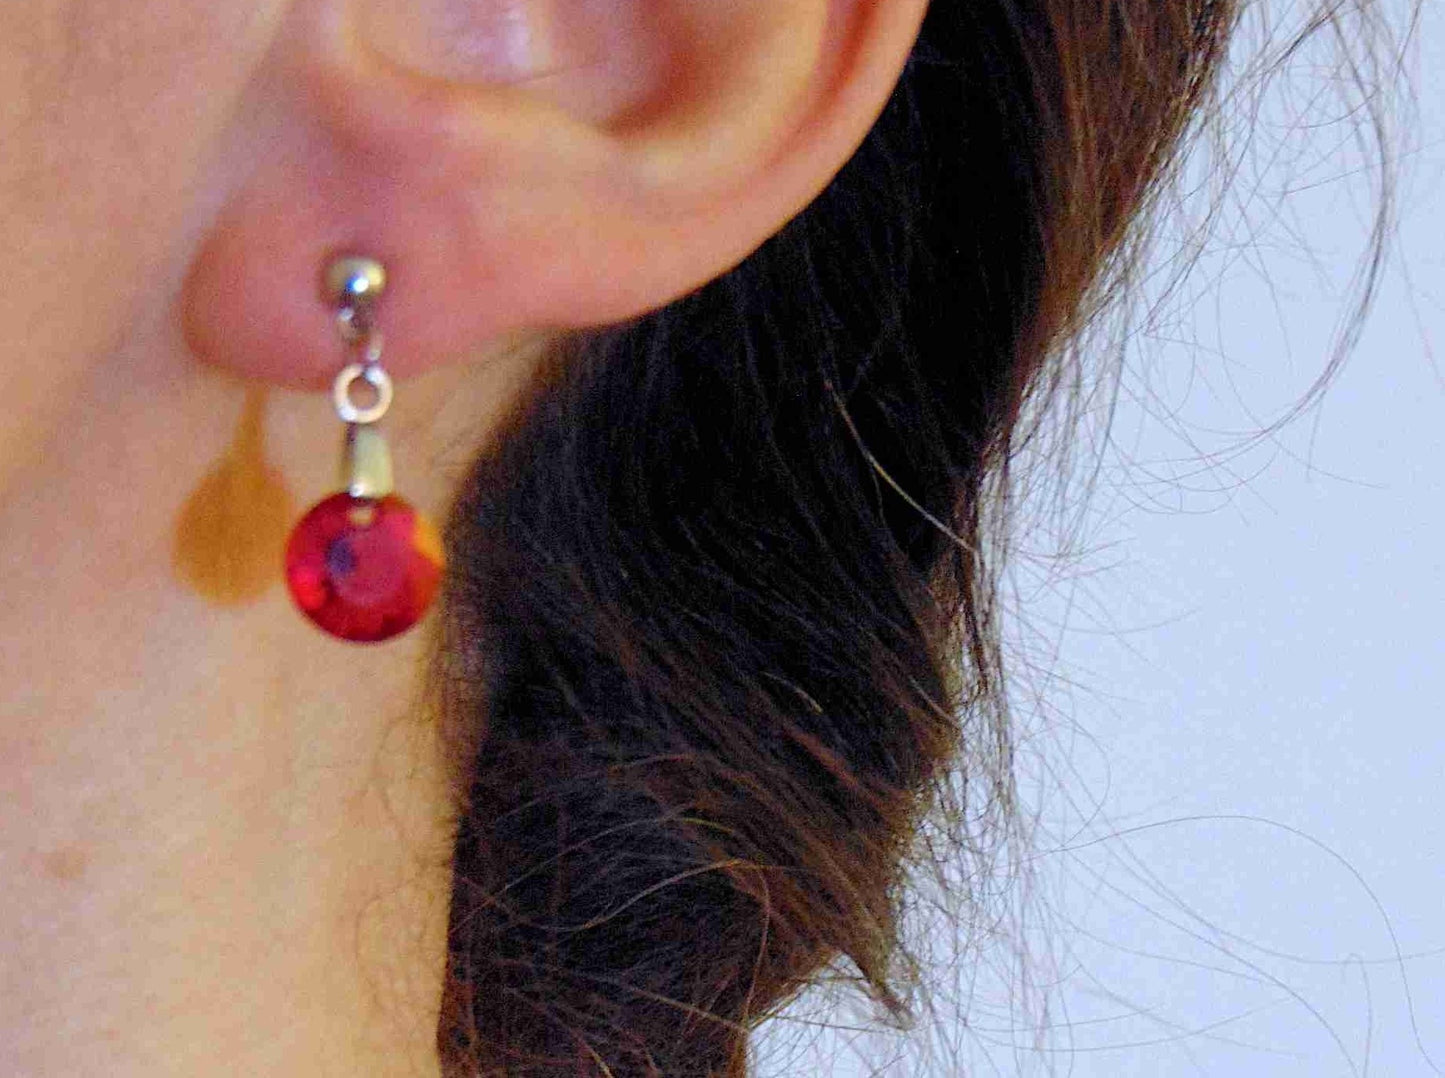 Short earrings with 10mm Astral Pink/Light Siam (red/pink) Classic Cut Swarovski crystals, stainless steel studs with tiny crystals